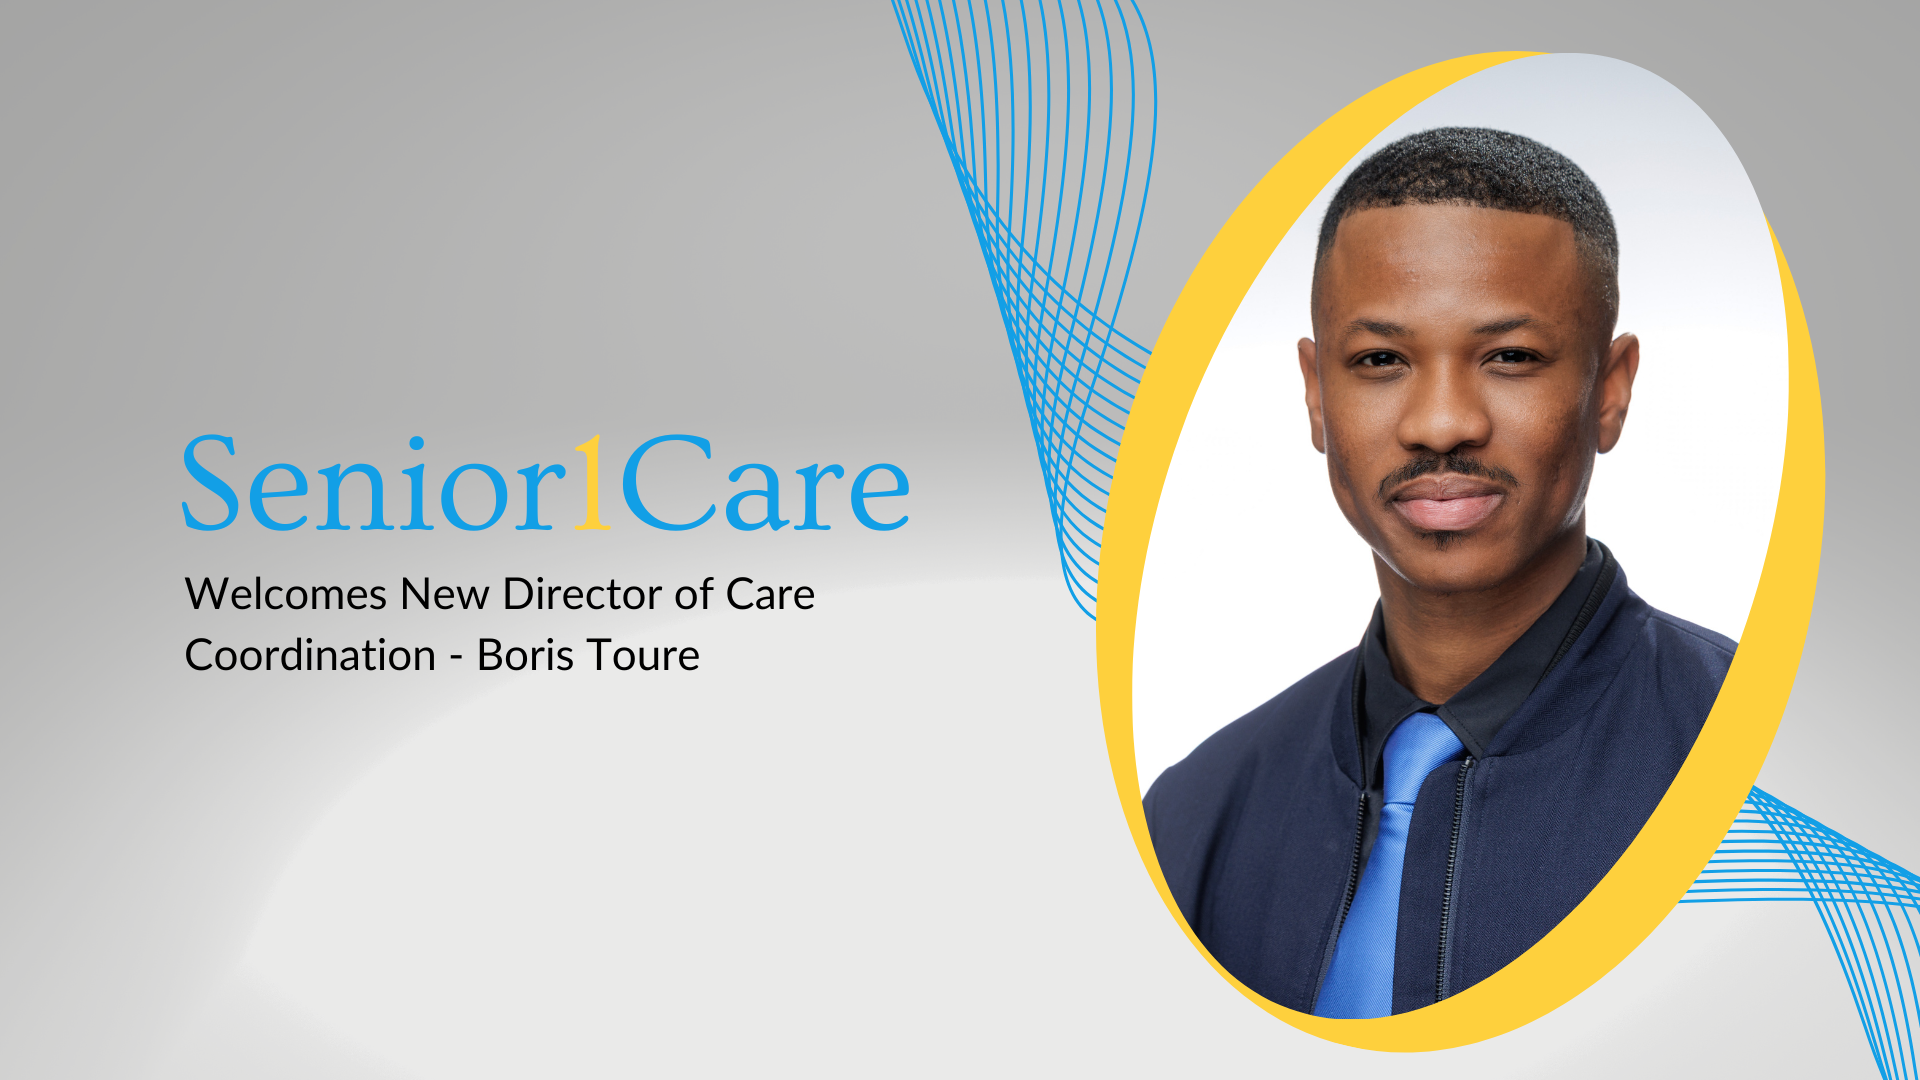 Welcomes New Director of Care Coordination - Boris Toure